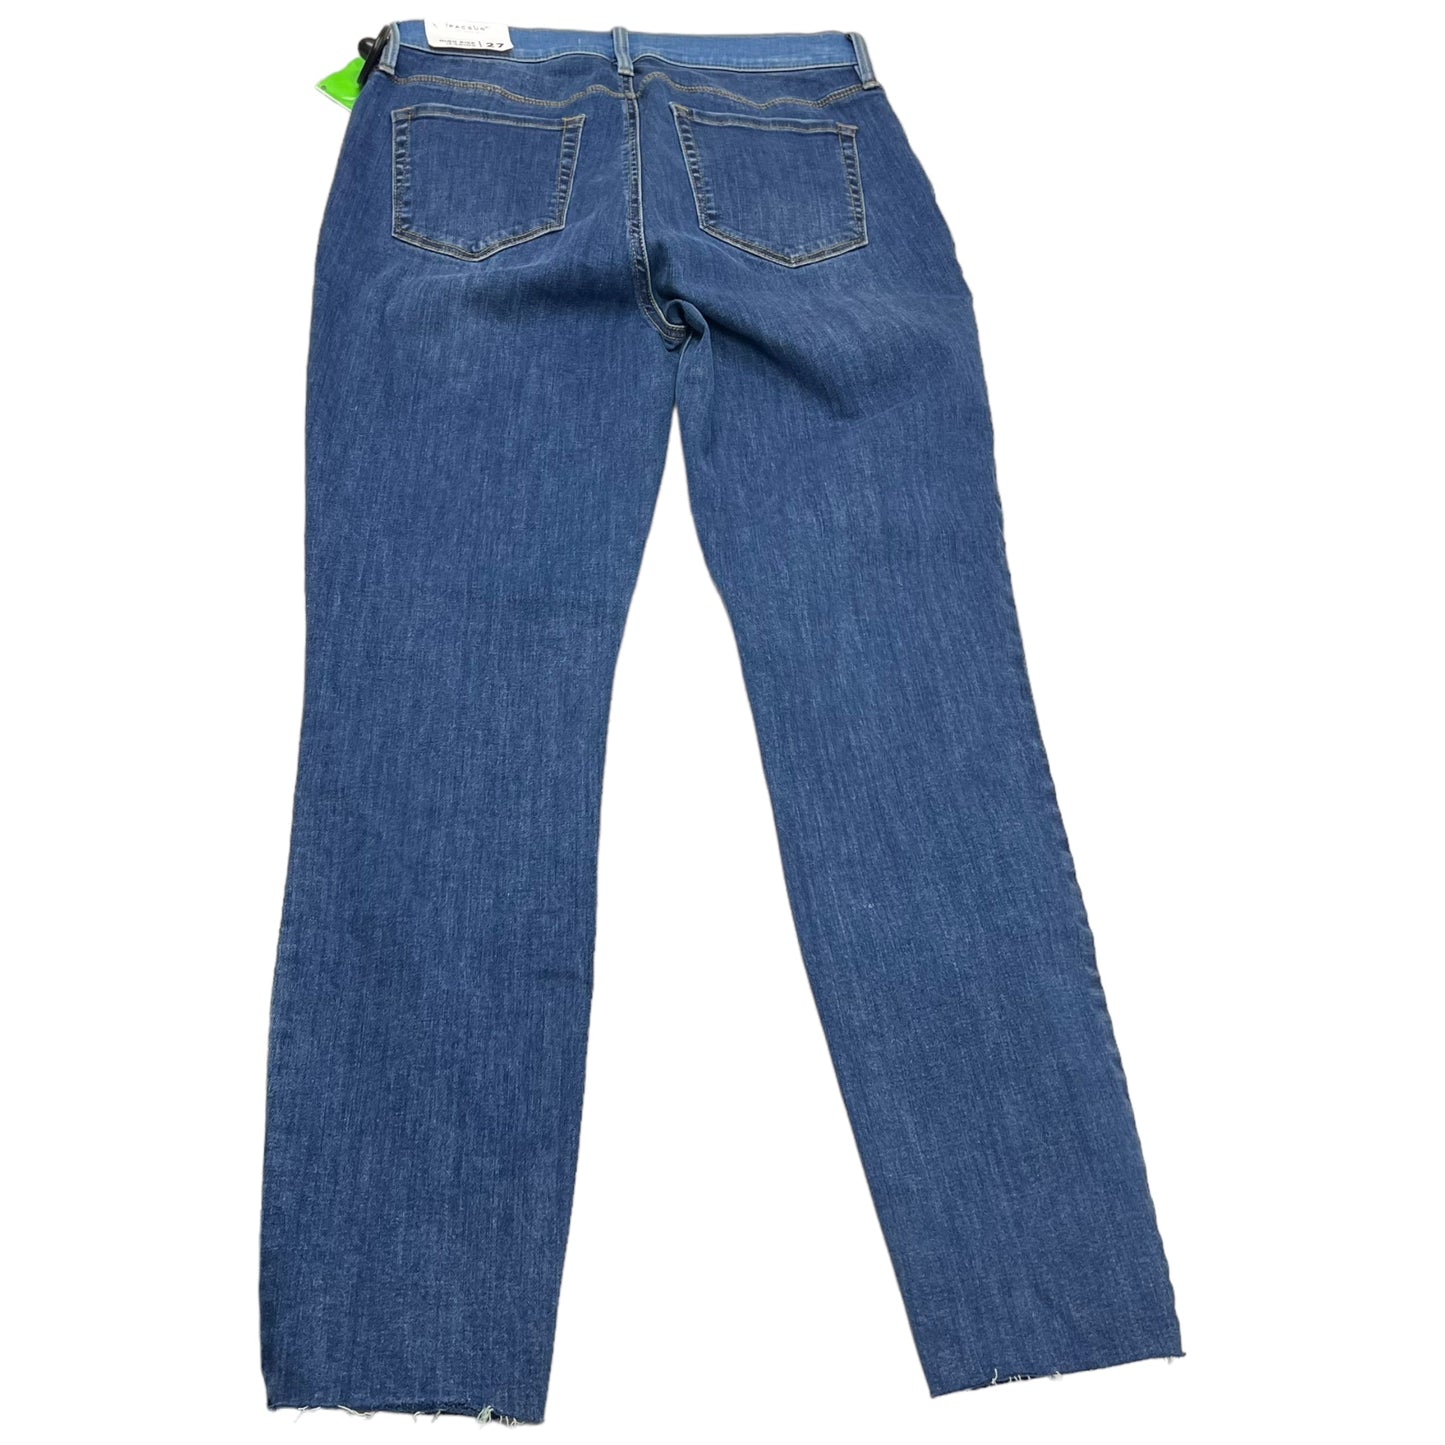 Jeans Skinny By Pacsun  Size: 4